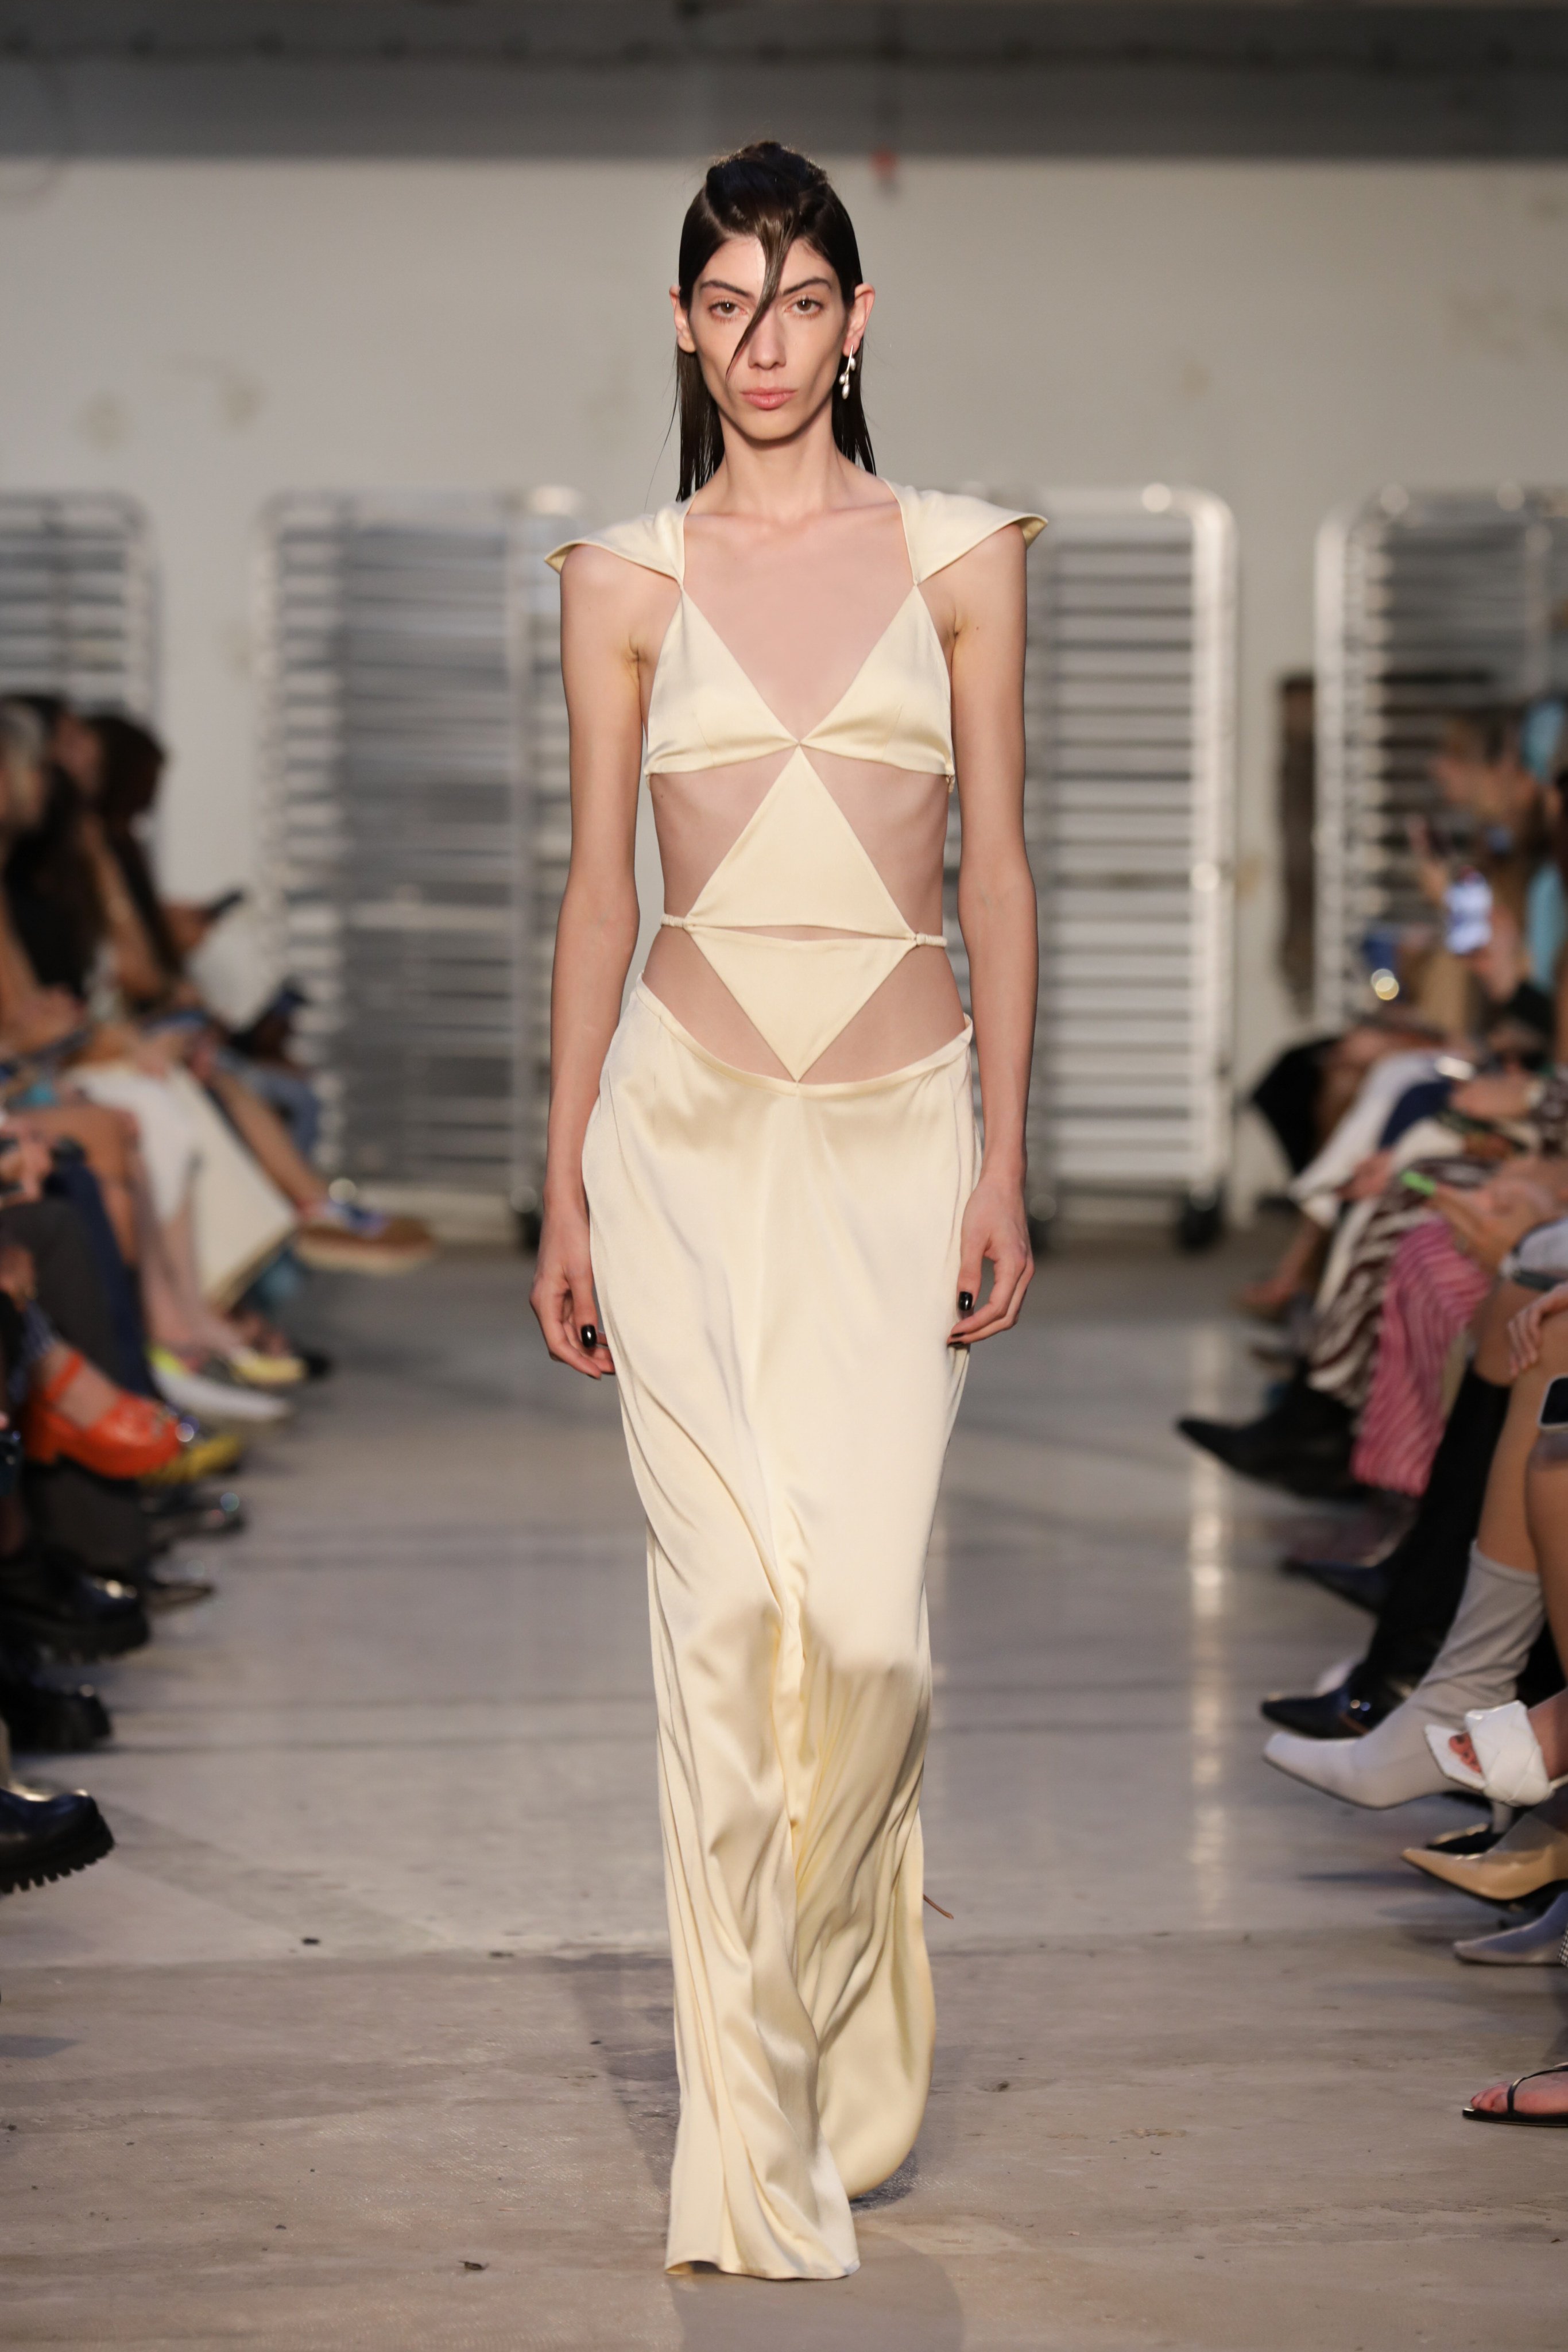 A look from Ukrainian fashion designer Bevza’s spring/summer 2023 collection. Photo: Bevza